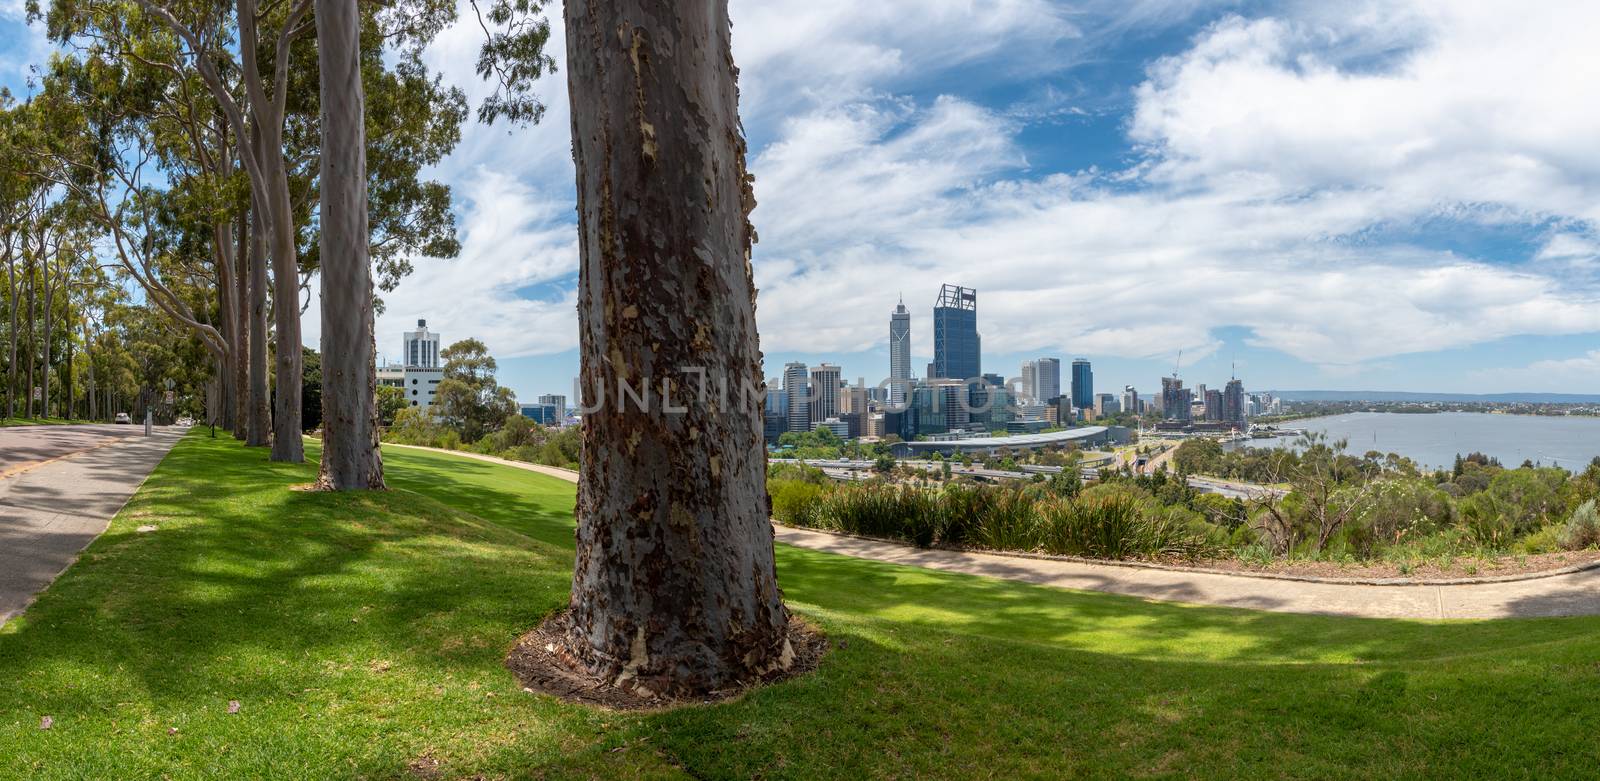 Panorama of Kingspark and Perth in Western Australia with trees and skyline